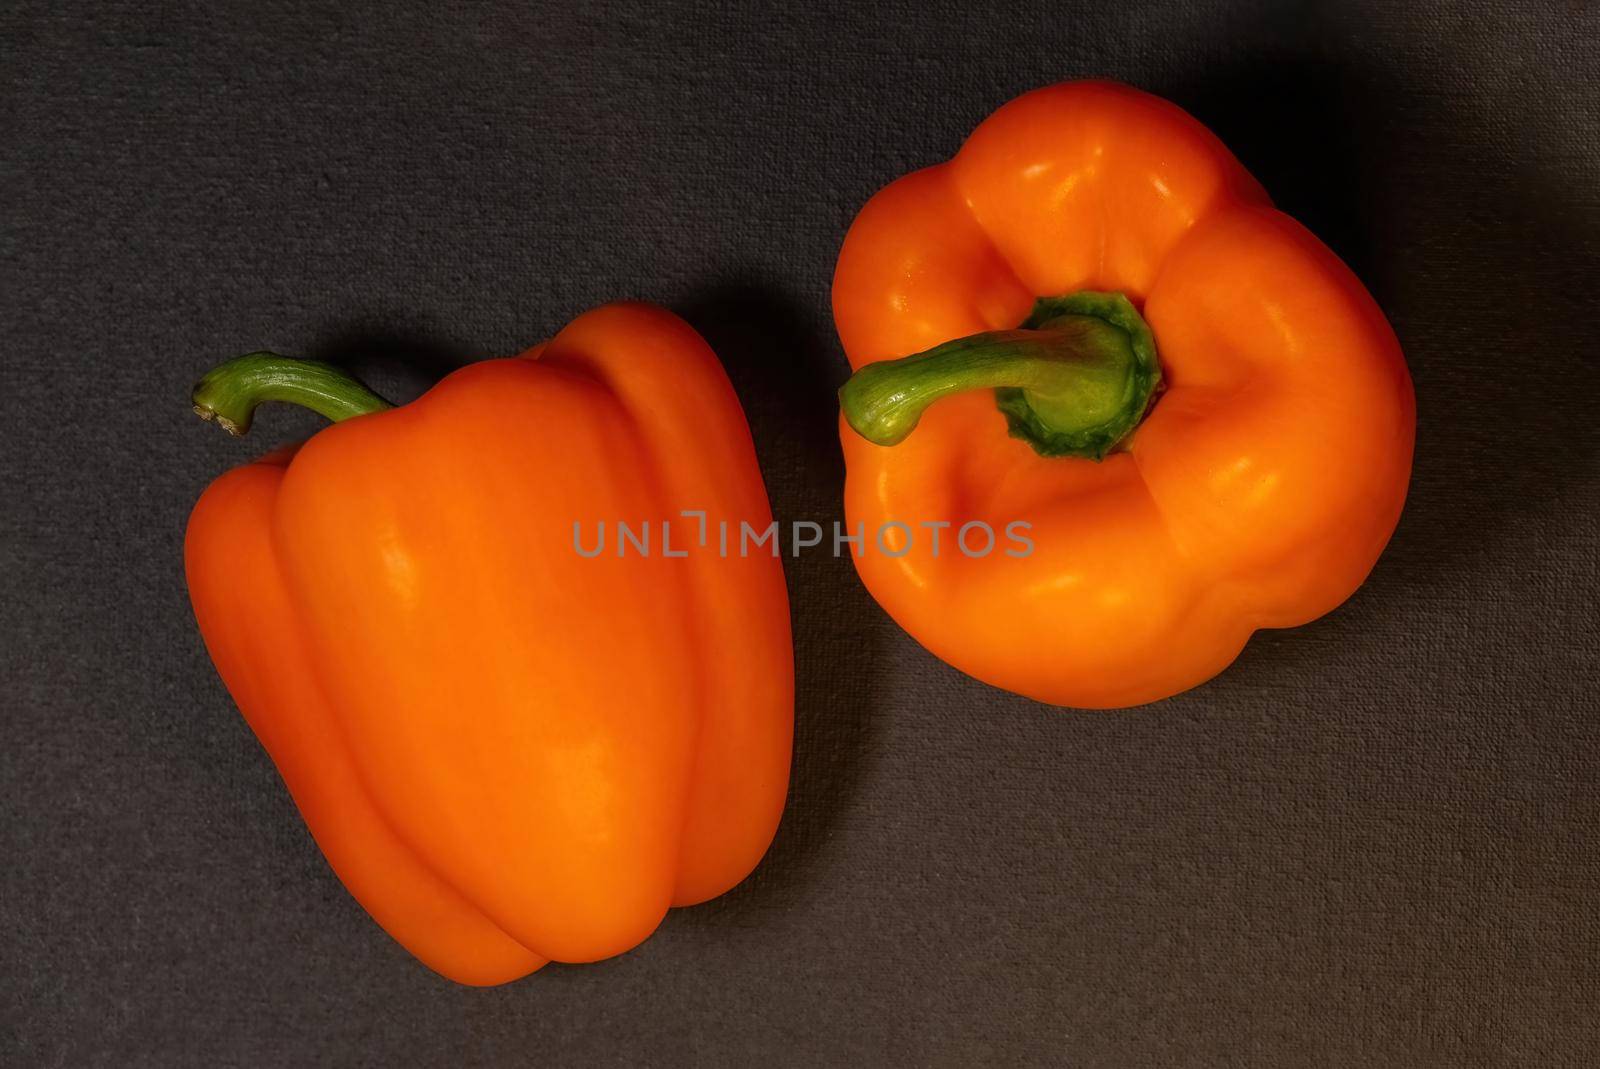 Two ripe orange bell peppers on a dark background, whole vegetables